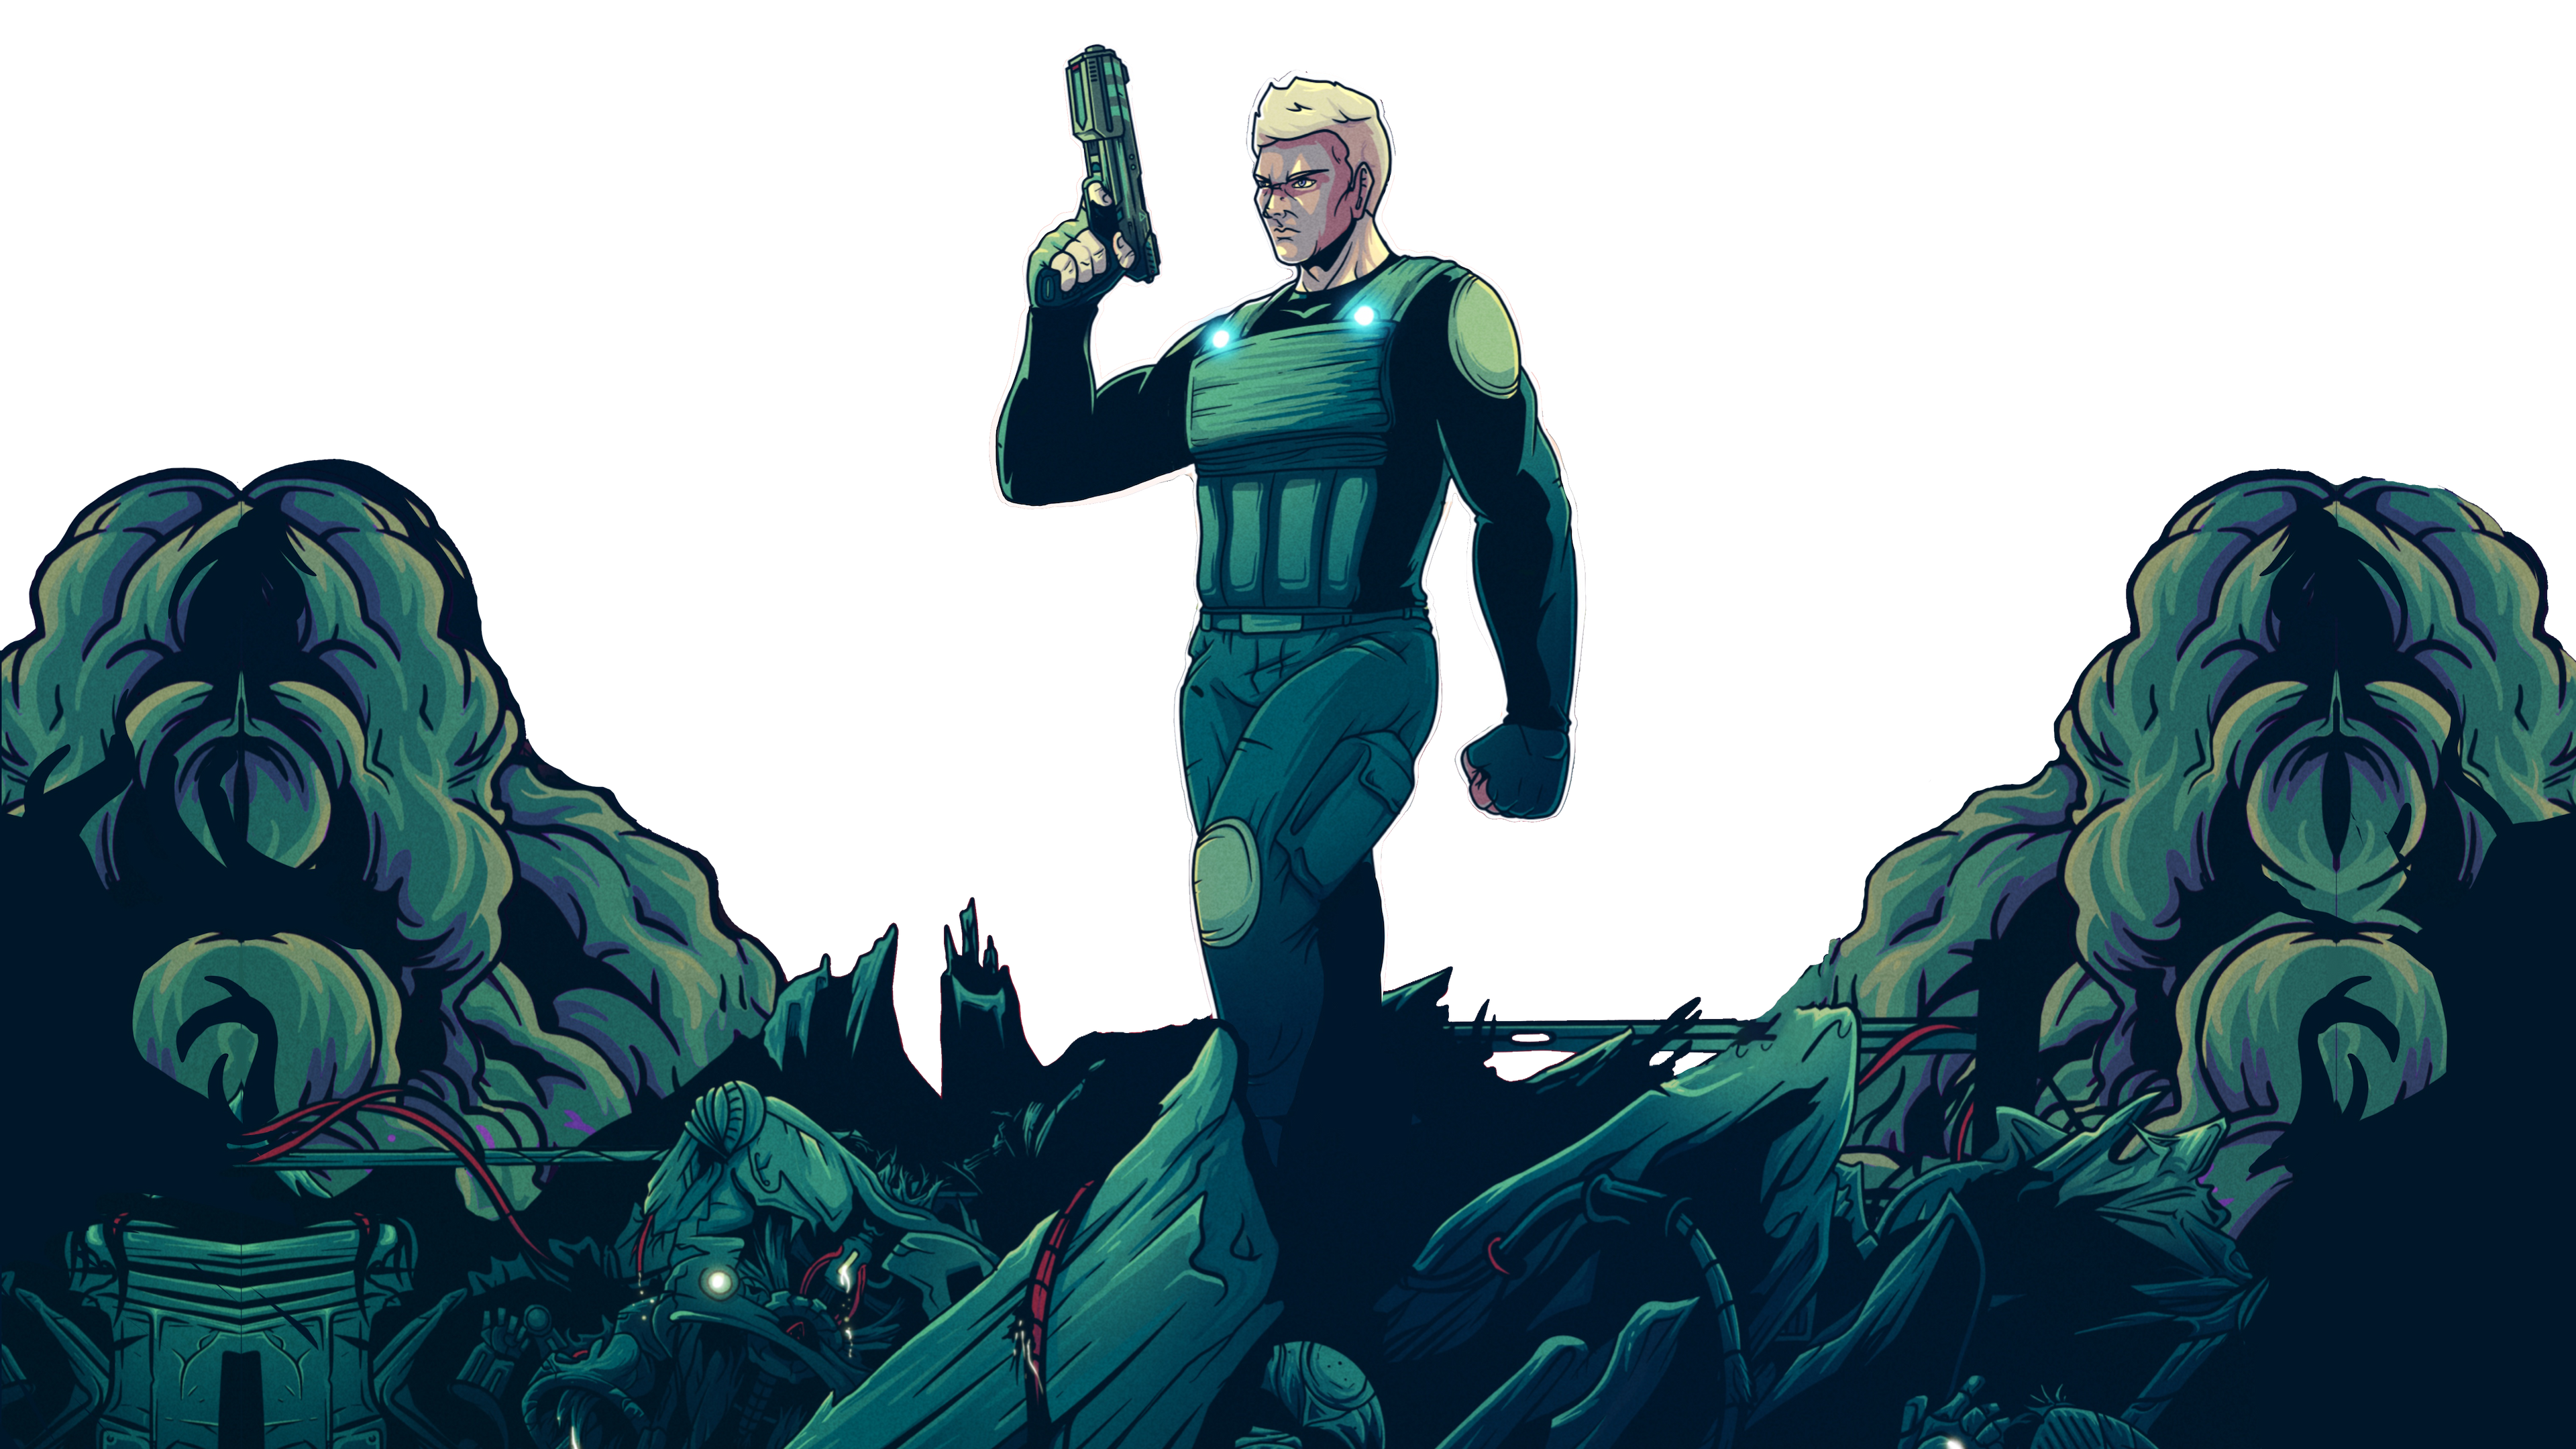 Colonel Frost holding a pistol and standing in a pile of dead robots, second image layer